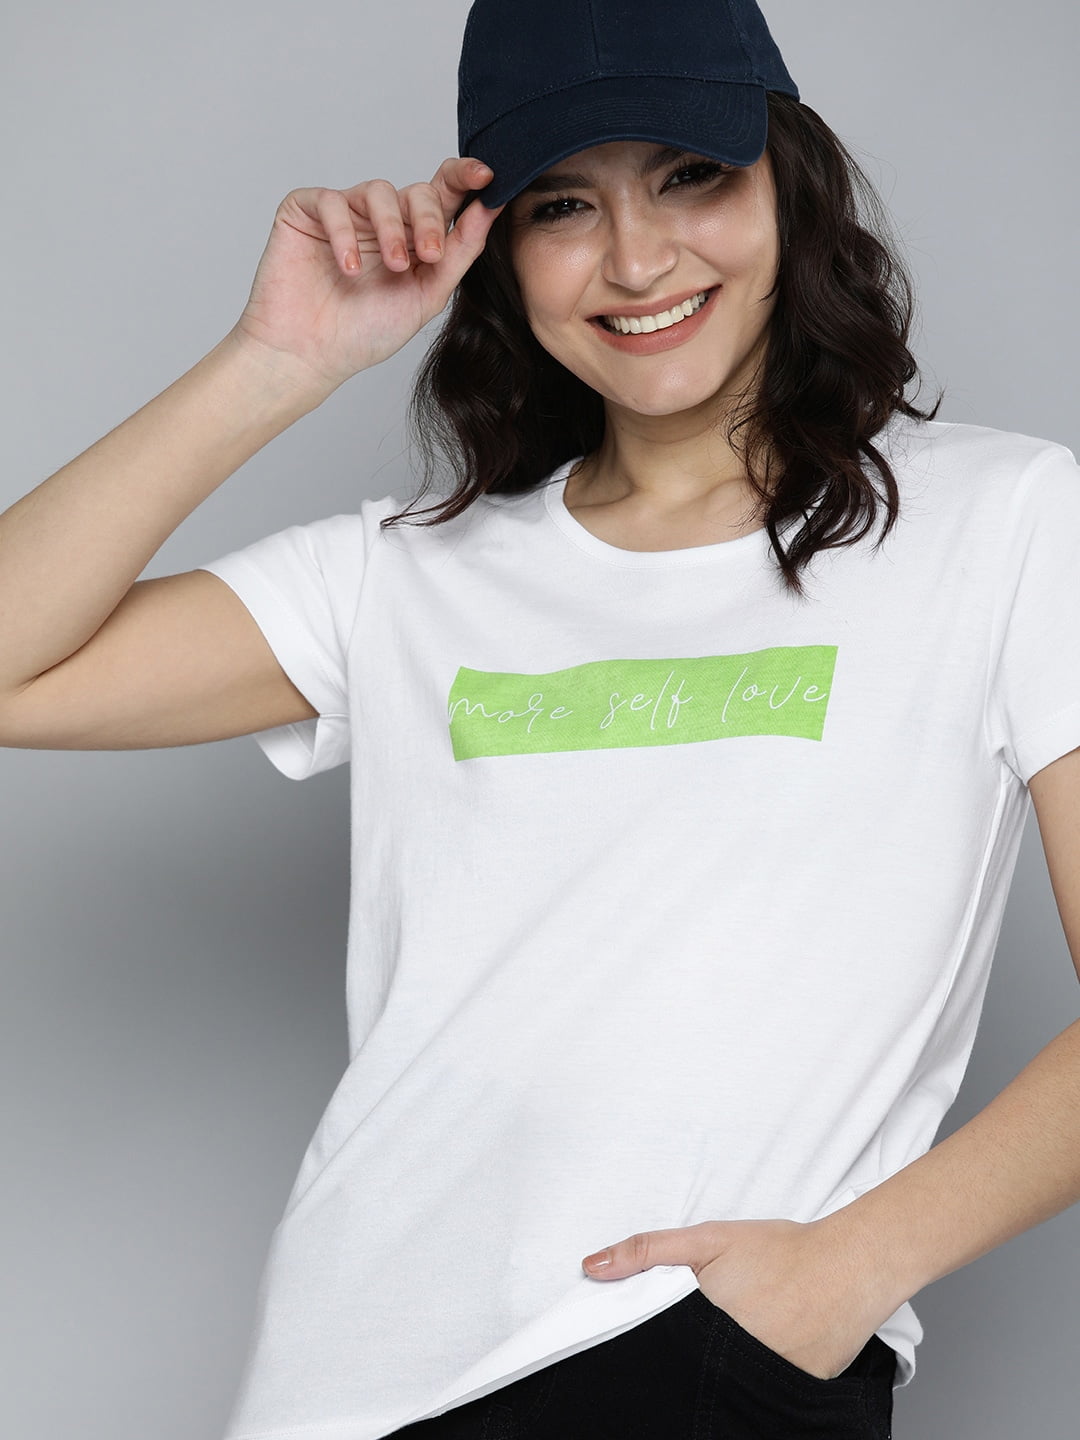 HERENOW - Myntra Casual T-Shirts Women White Green Typography Printed Short Sleeves Regular Pure Cotton Round Neck Ready Wear T-shirt - Walmart.com